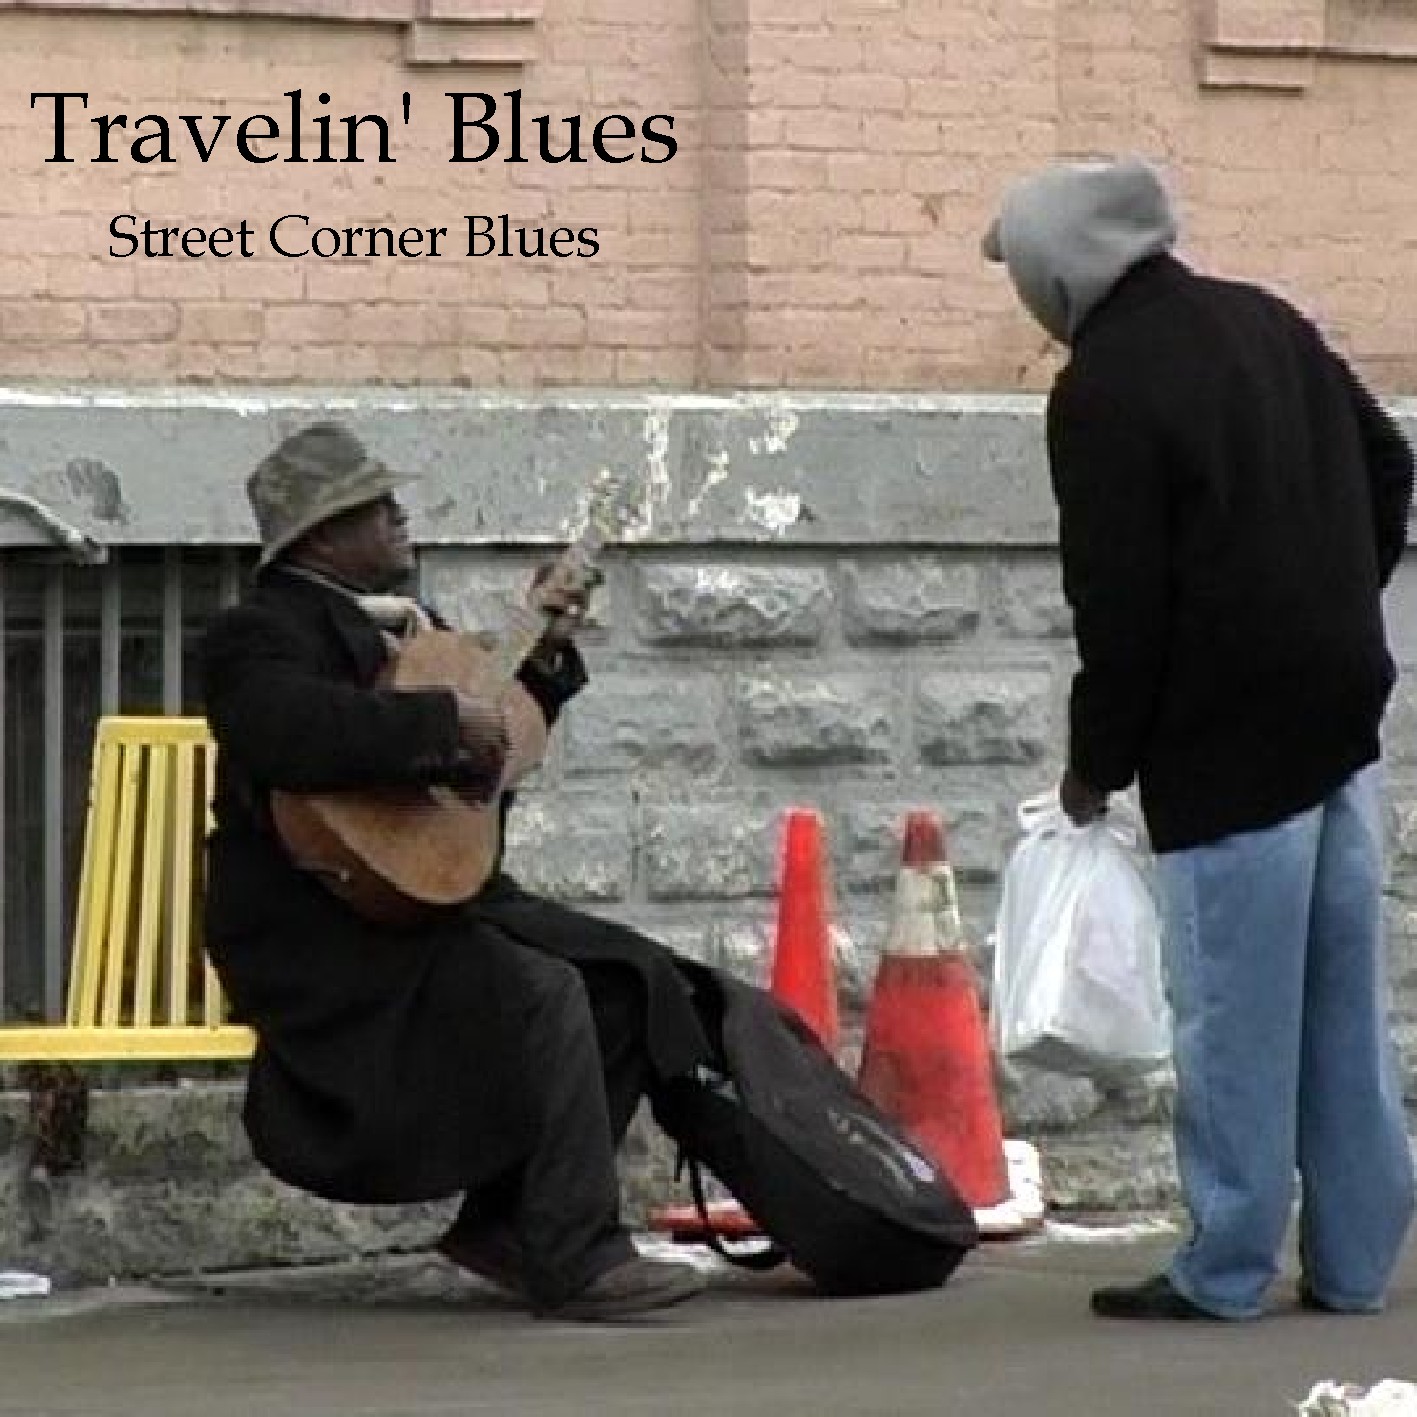 Street Corner Blues includes: Bunion Stew, Wade In The Water, Johnny B., Lonesome, Street Bussin', The Saints Go Marchin' In, When I Had Plenty Money, 23rd Psalm, Big Leg Woman, I Got The Blues, Is That The Melody, Come by Here/Would I Make it Back 